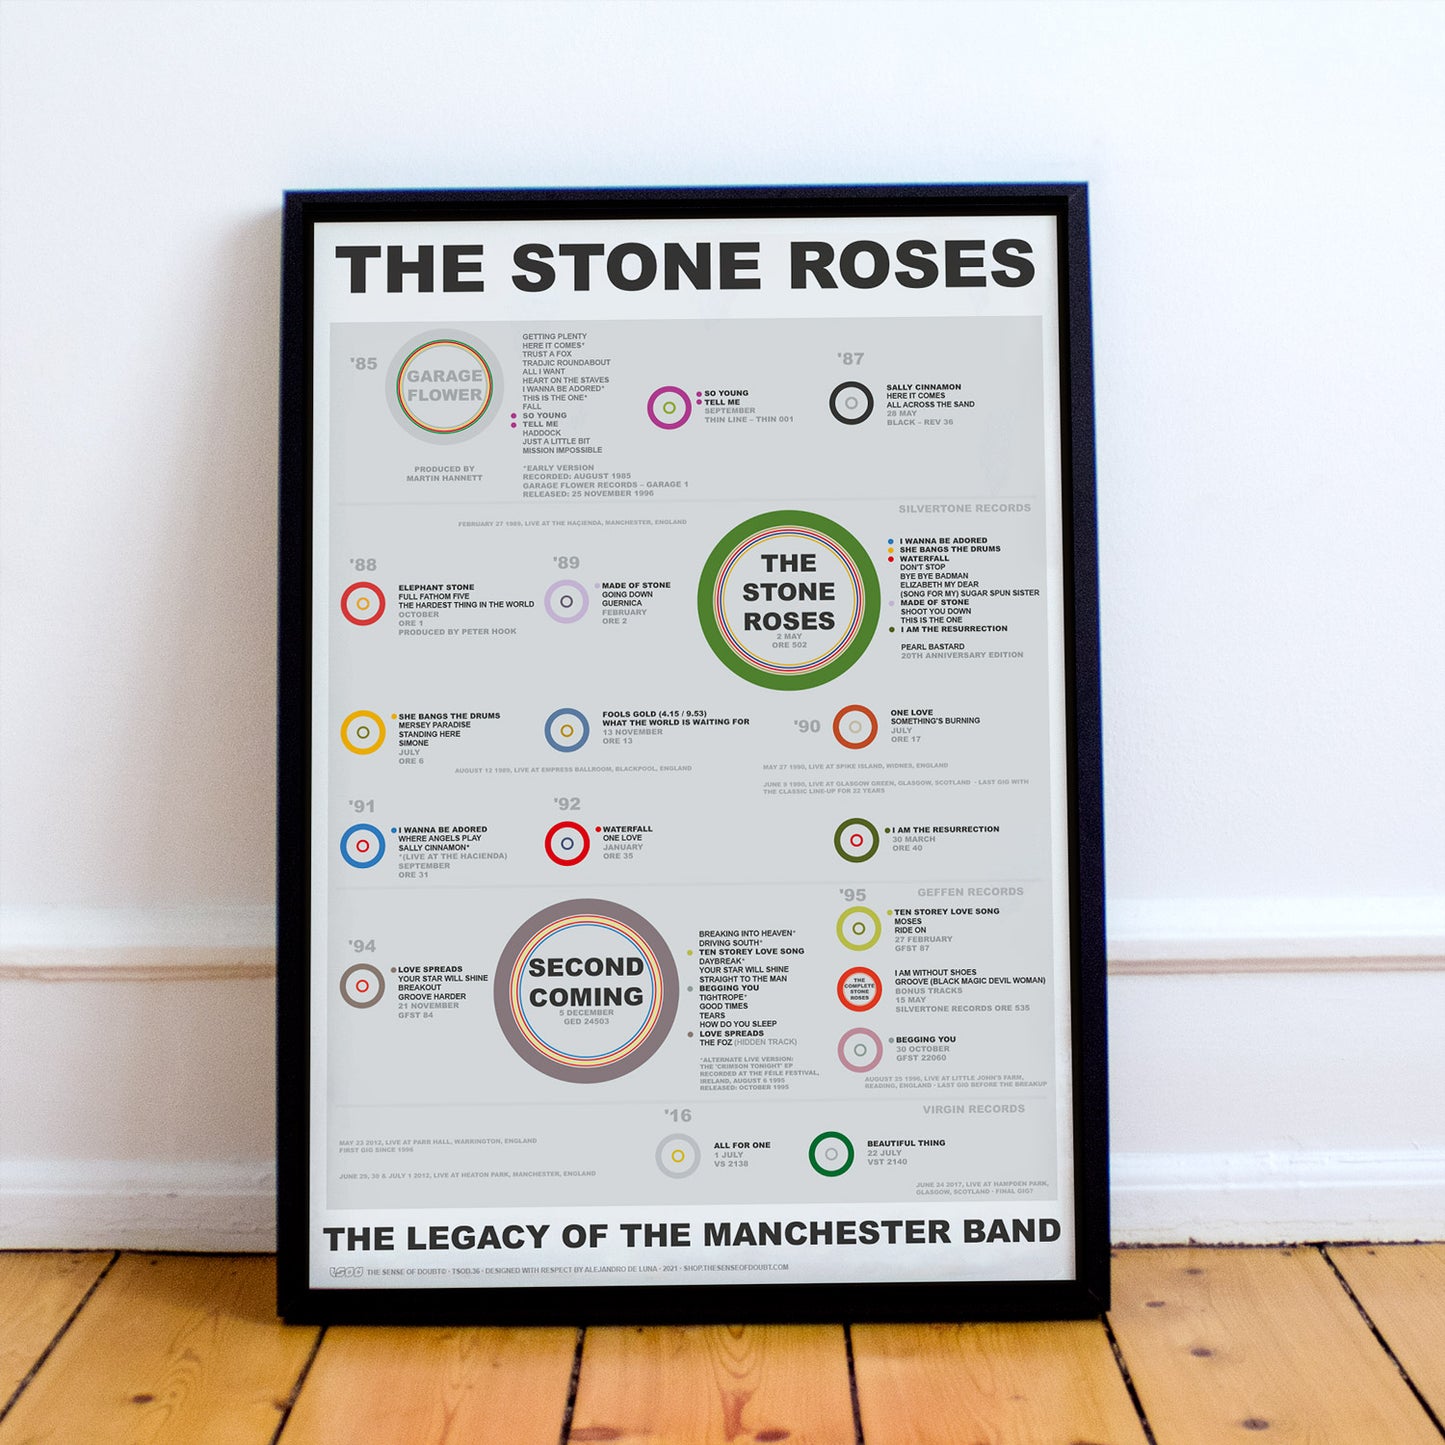 The Stone Roses' Complete Legacy - The Sense of Doubt - The Stone Roses' Complete Legacy - The Sense Of Doubt